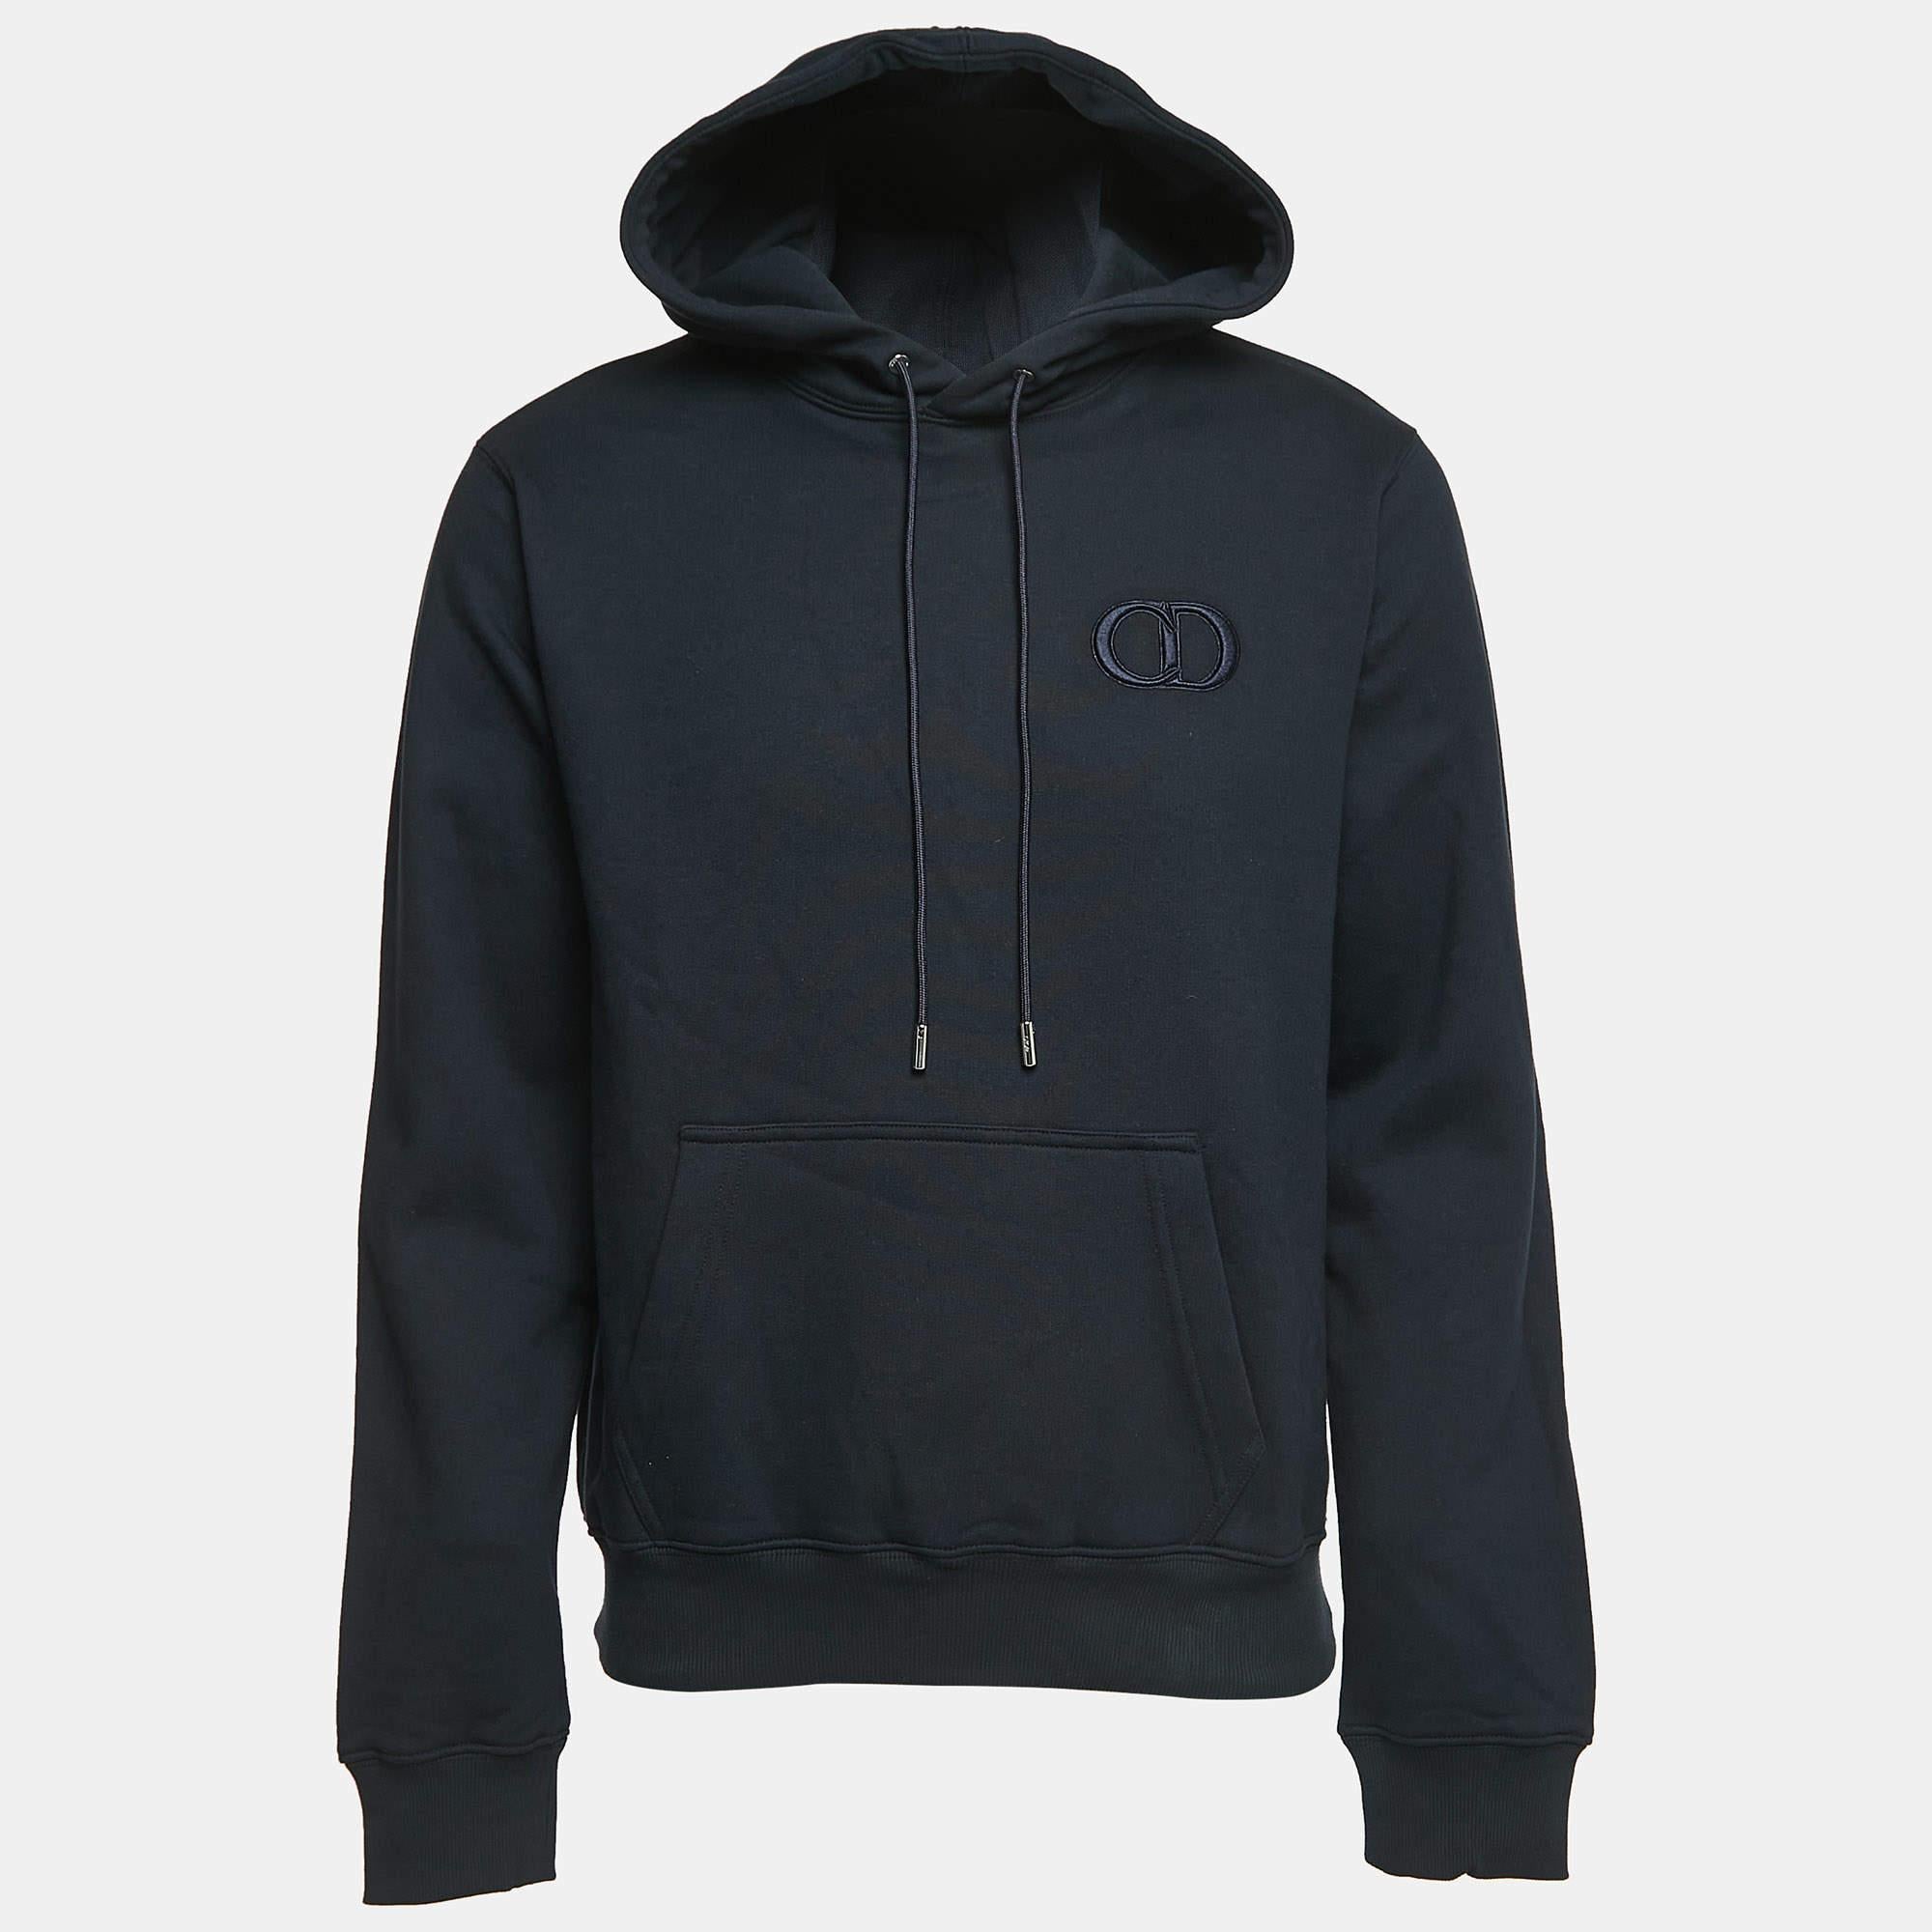 This hoodie is all about sporting a classy and comfy style. It is tailored from soft fabric, which is highlighted with signature accents.

